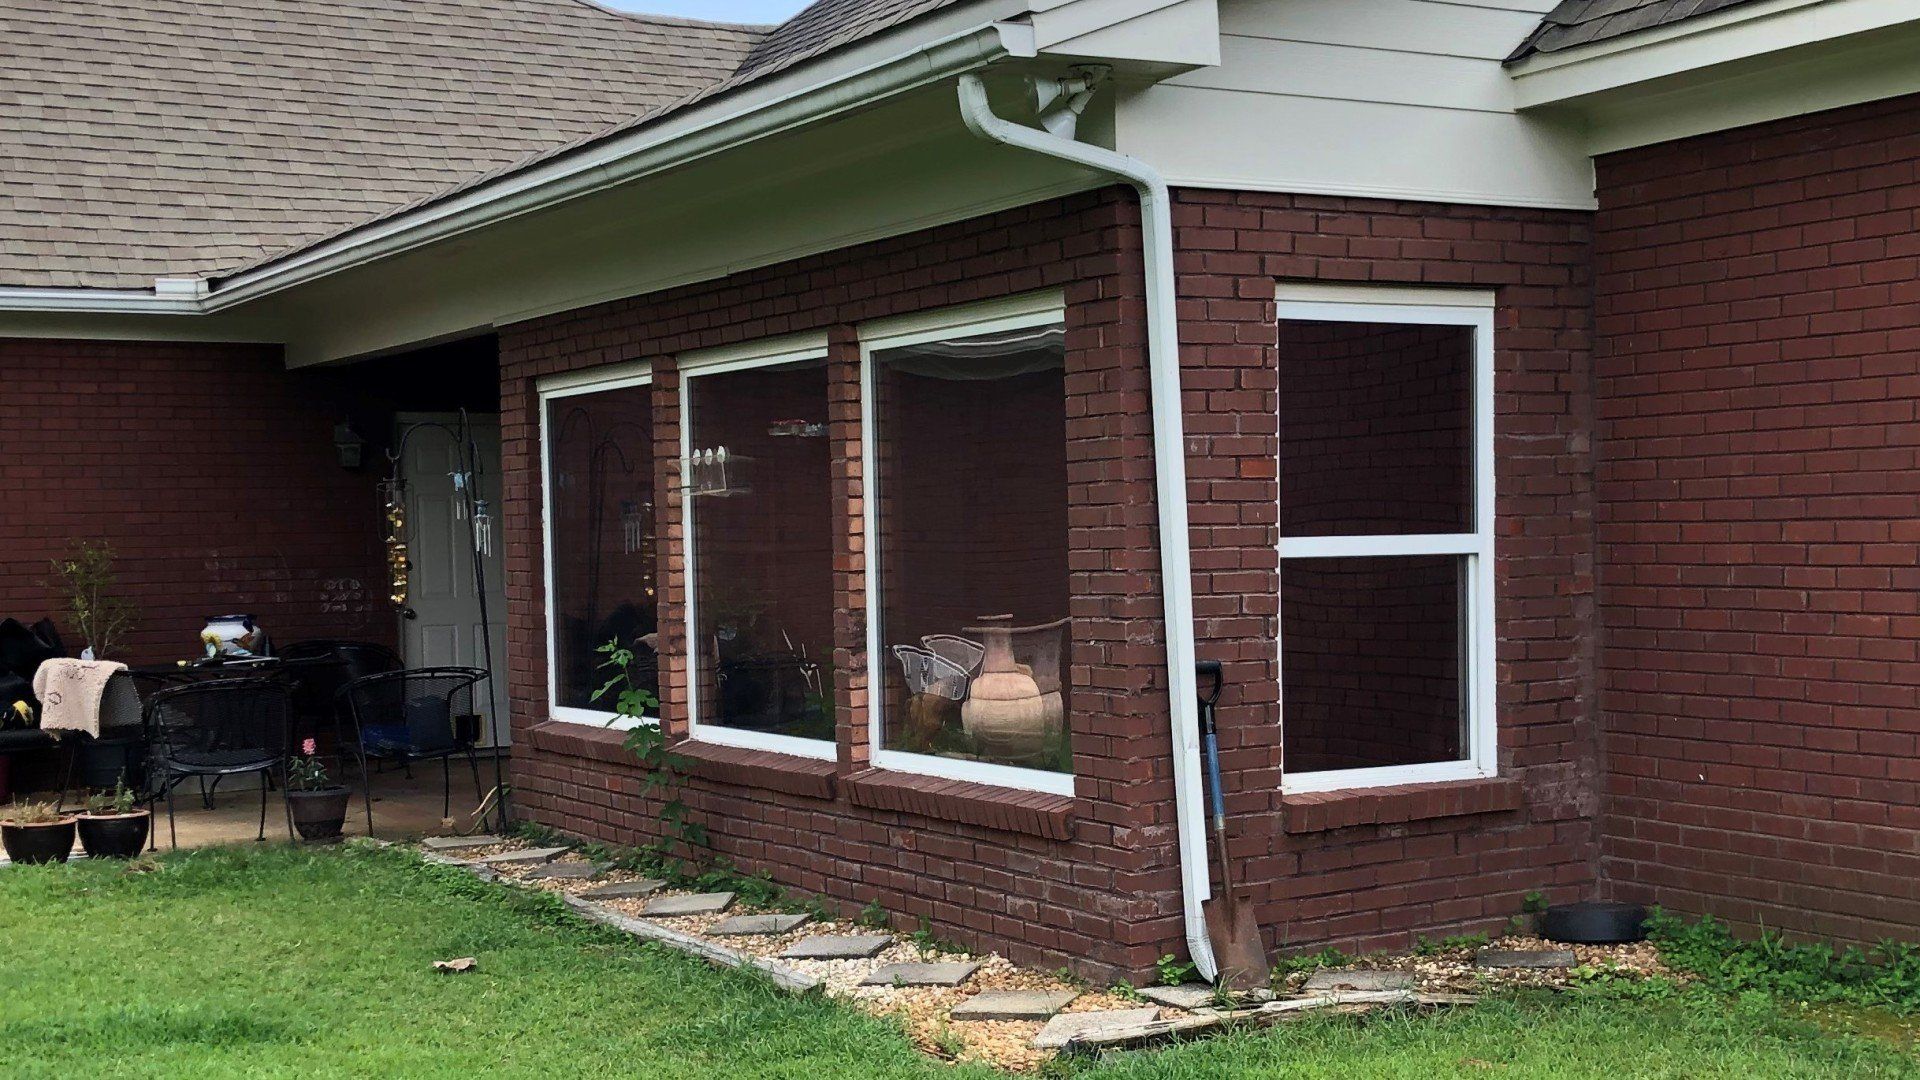 After professional home tinting service on 7.16.2019 - Residential window Tint installed to sun room in Montgomery, Alabama